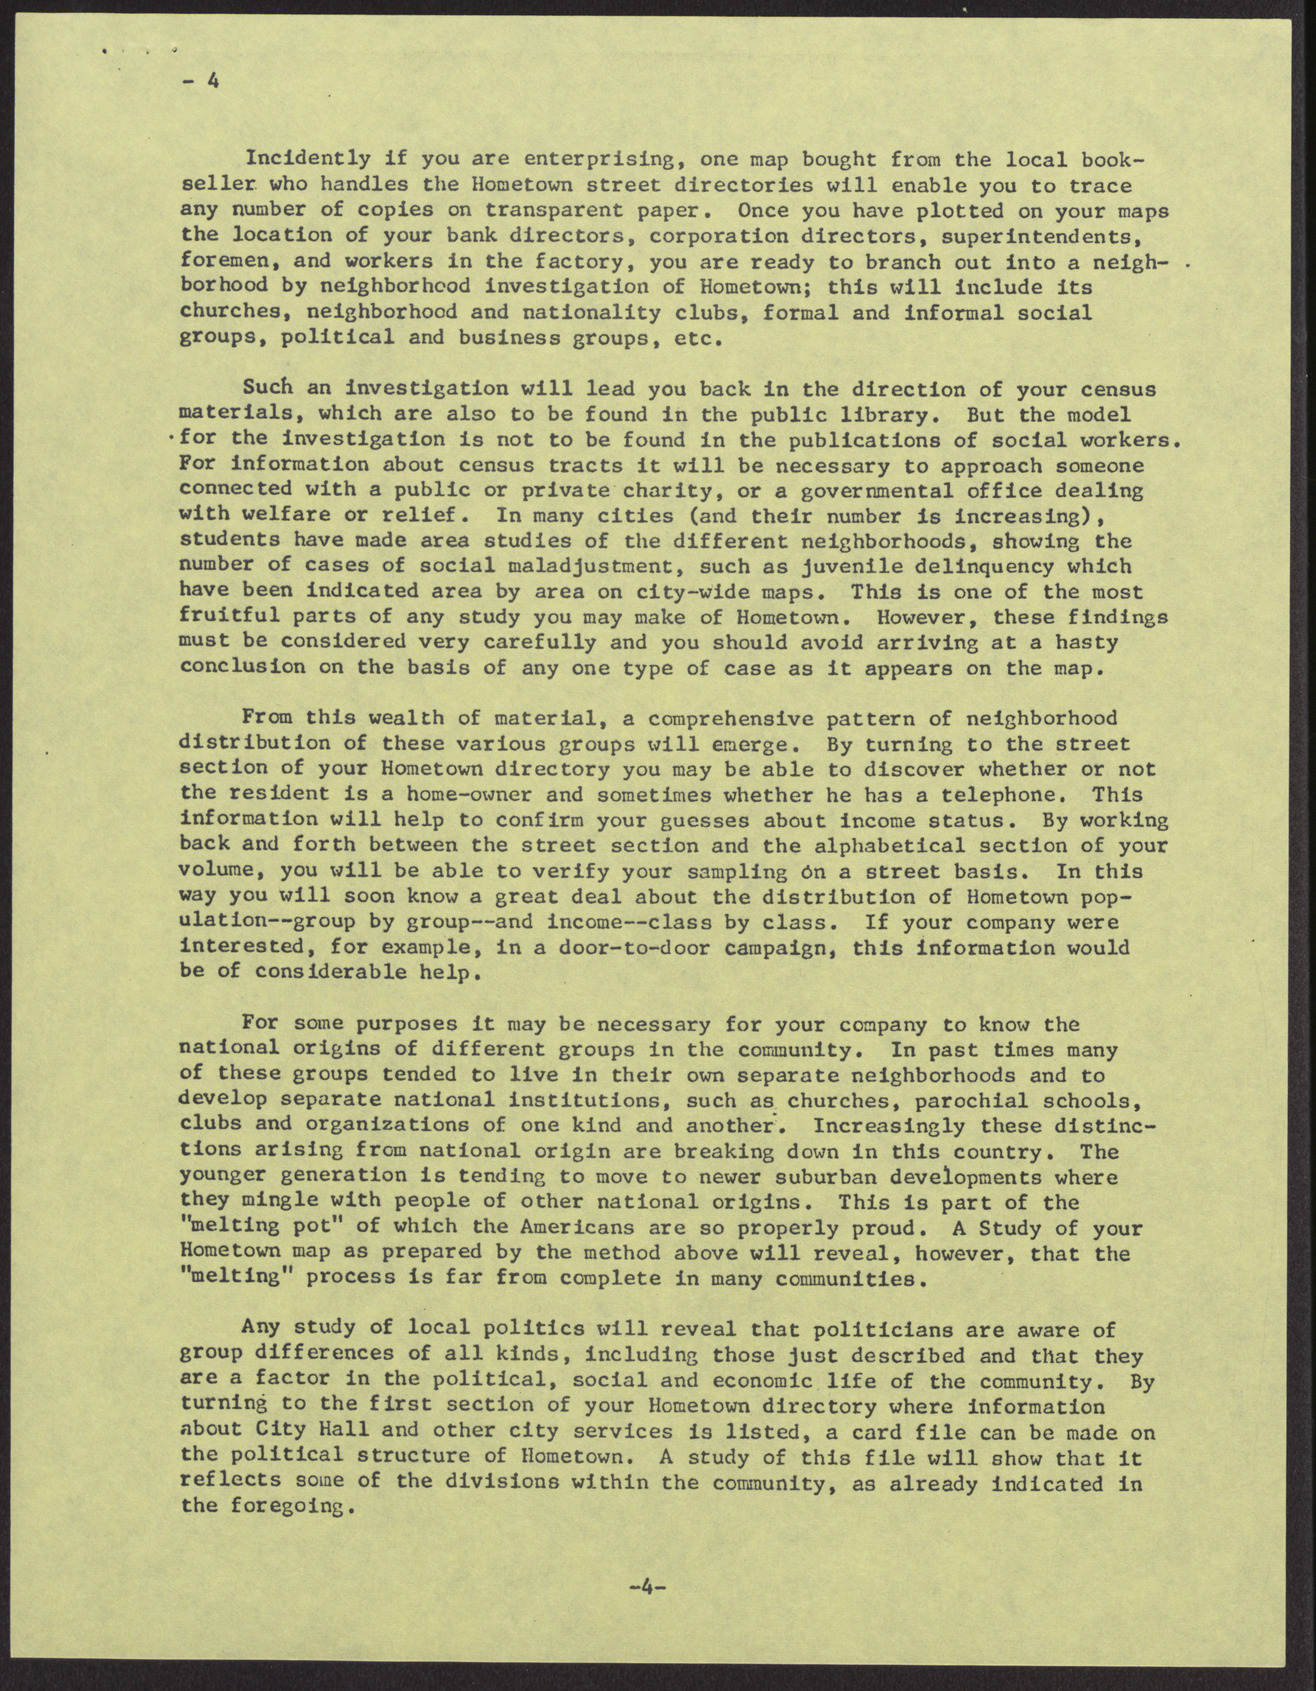 "Suggestions for a Study of Your Hometown," by Robert K. Lamb (7 pages), 1952, page 4